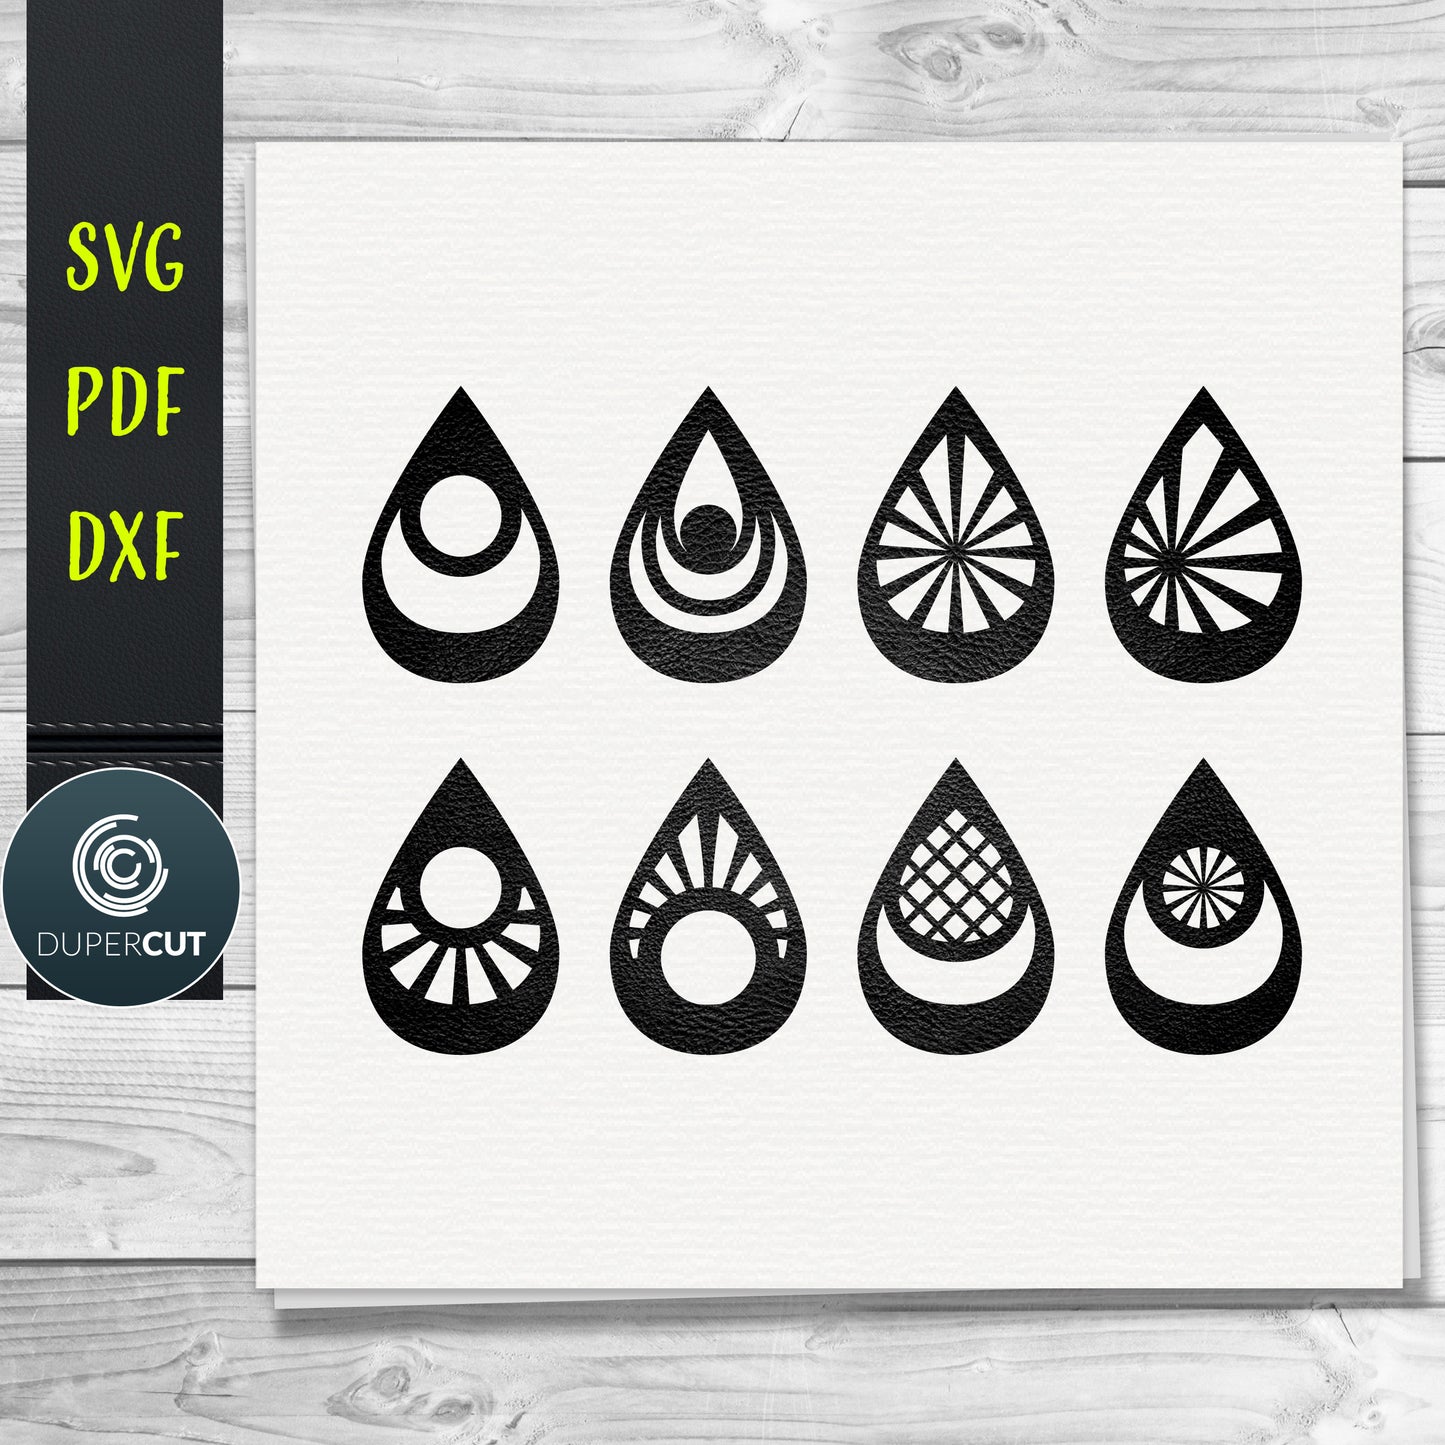 DIY Leather Earrings SVG PDF DXF vector files. Jewellery making template for laser and cutting machines - Glowforge, Cricut, Silhouette Cameo.